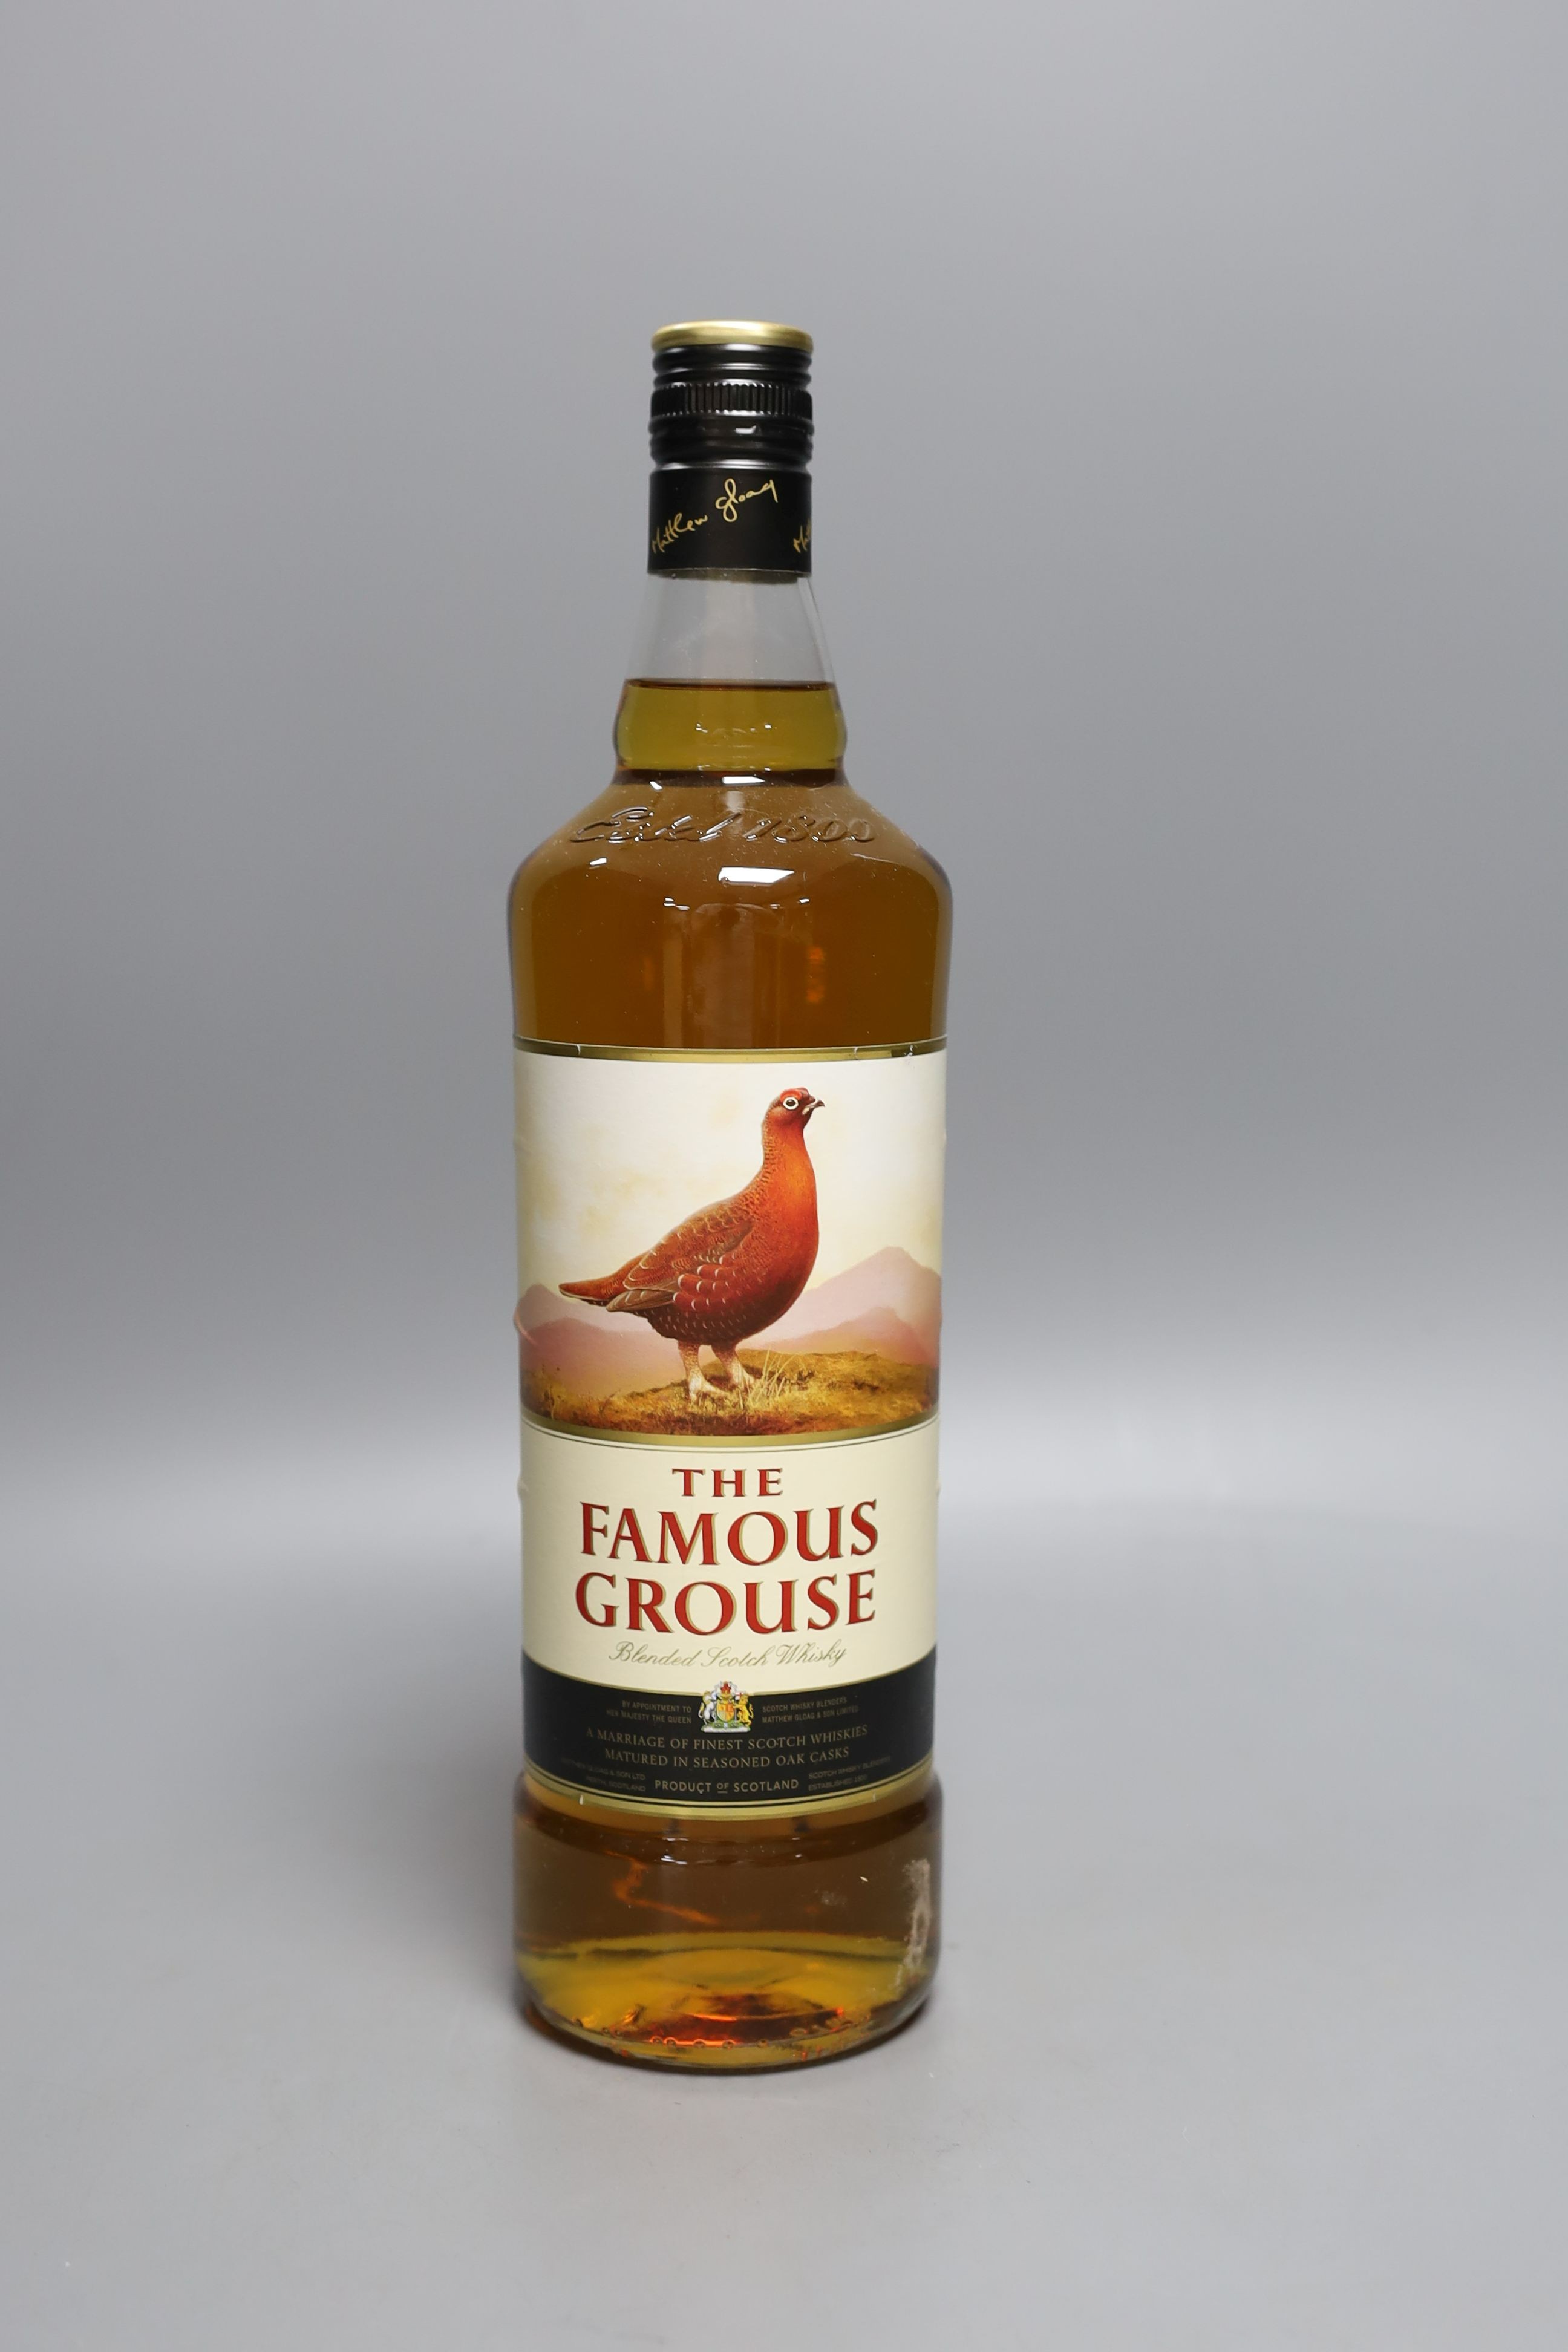 Eleven single litre bottles of The Famous Grouse scotch whisky